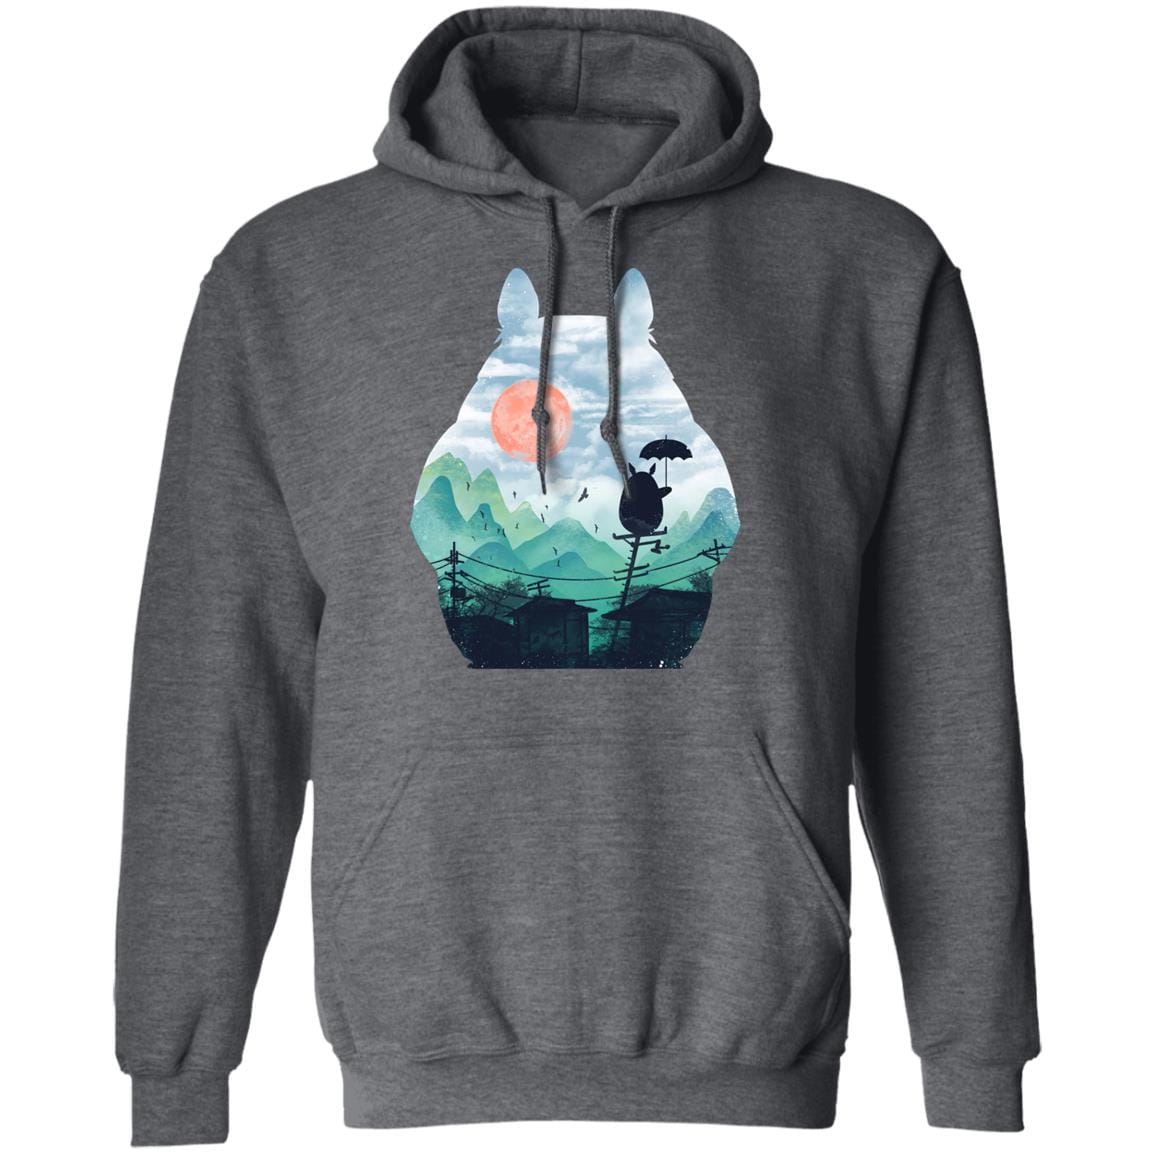 Totoro on the Line Lanscape Hoodie